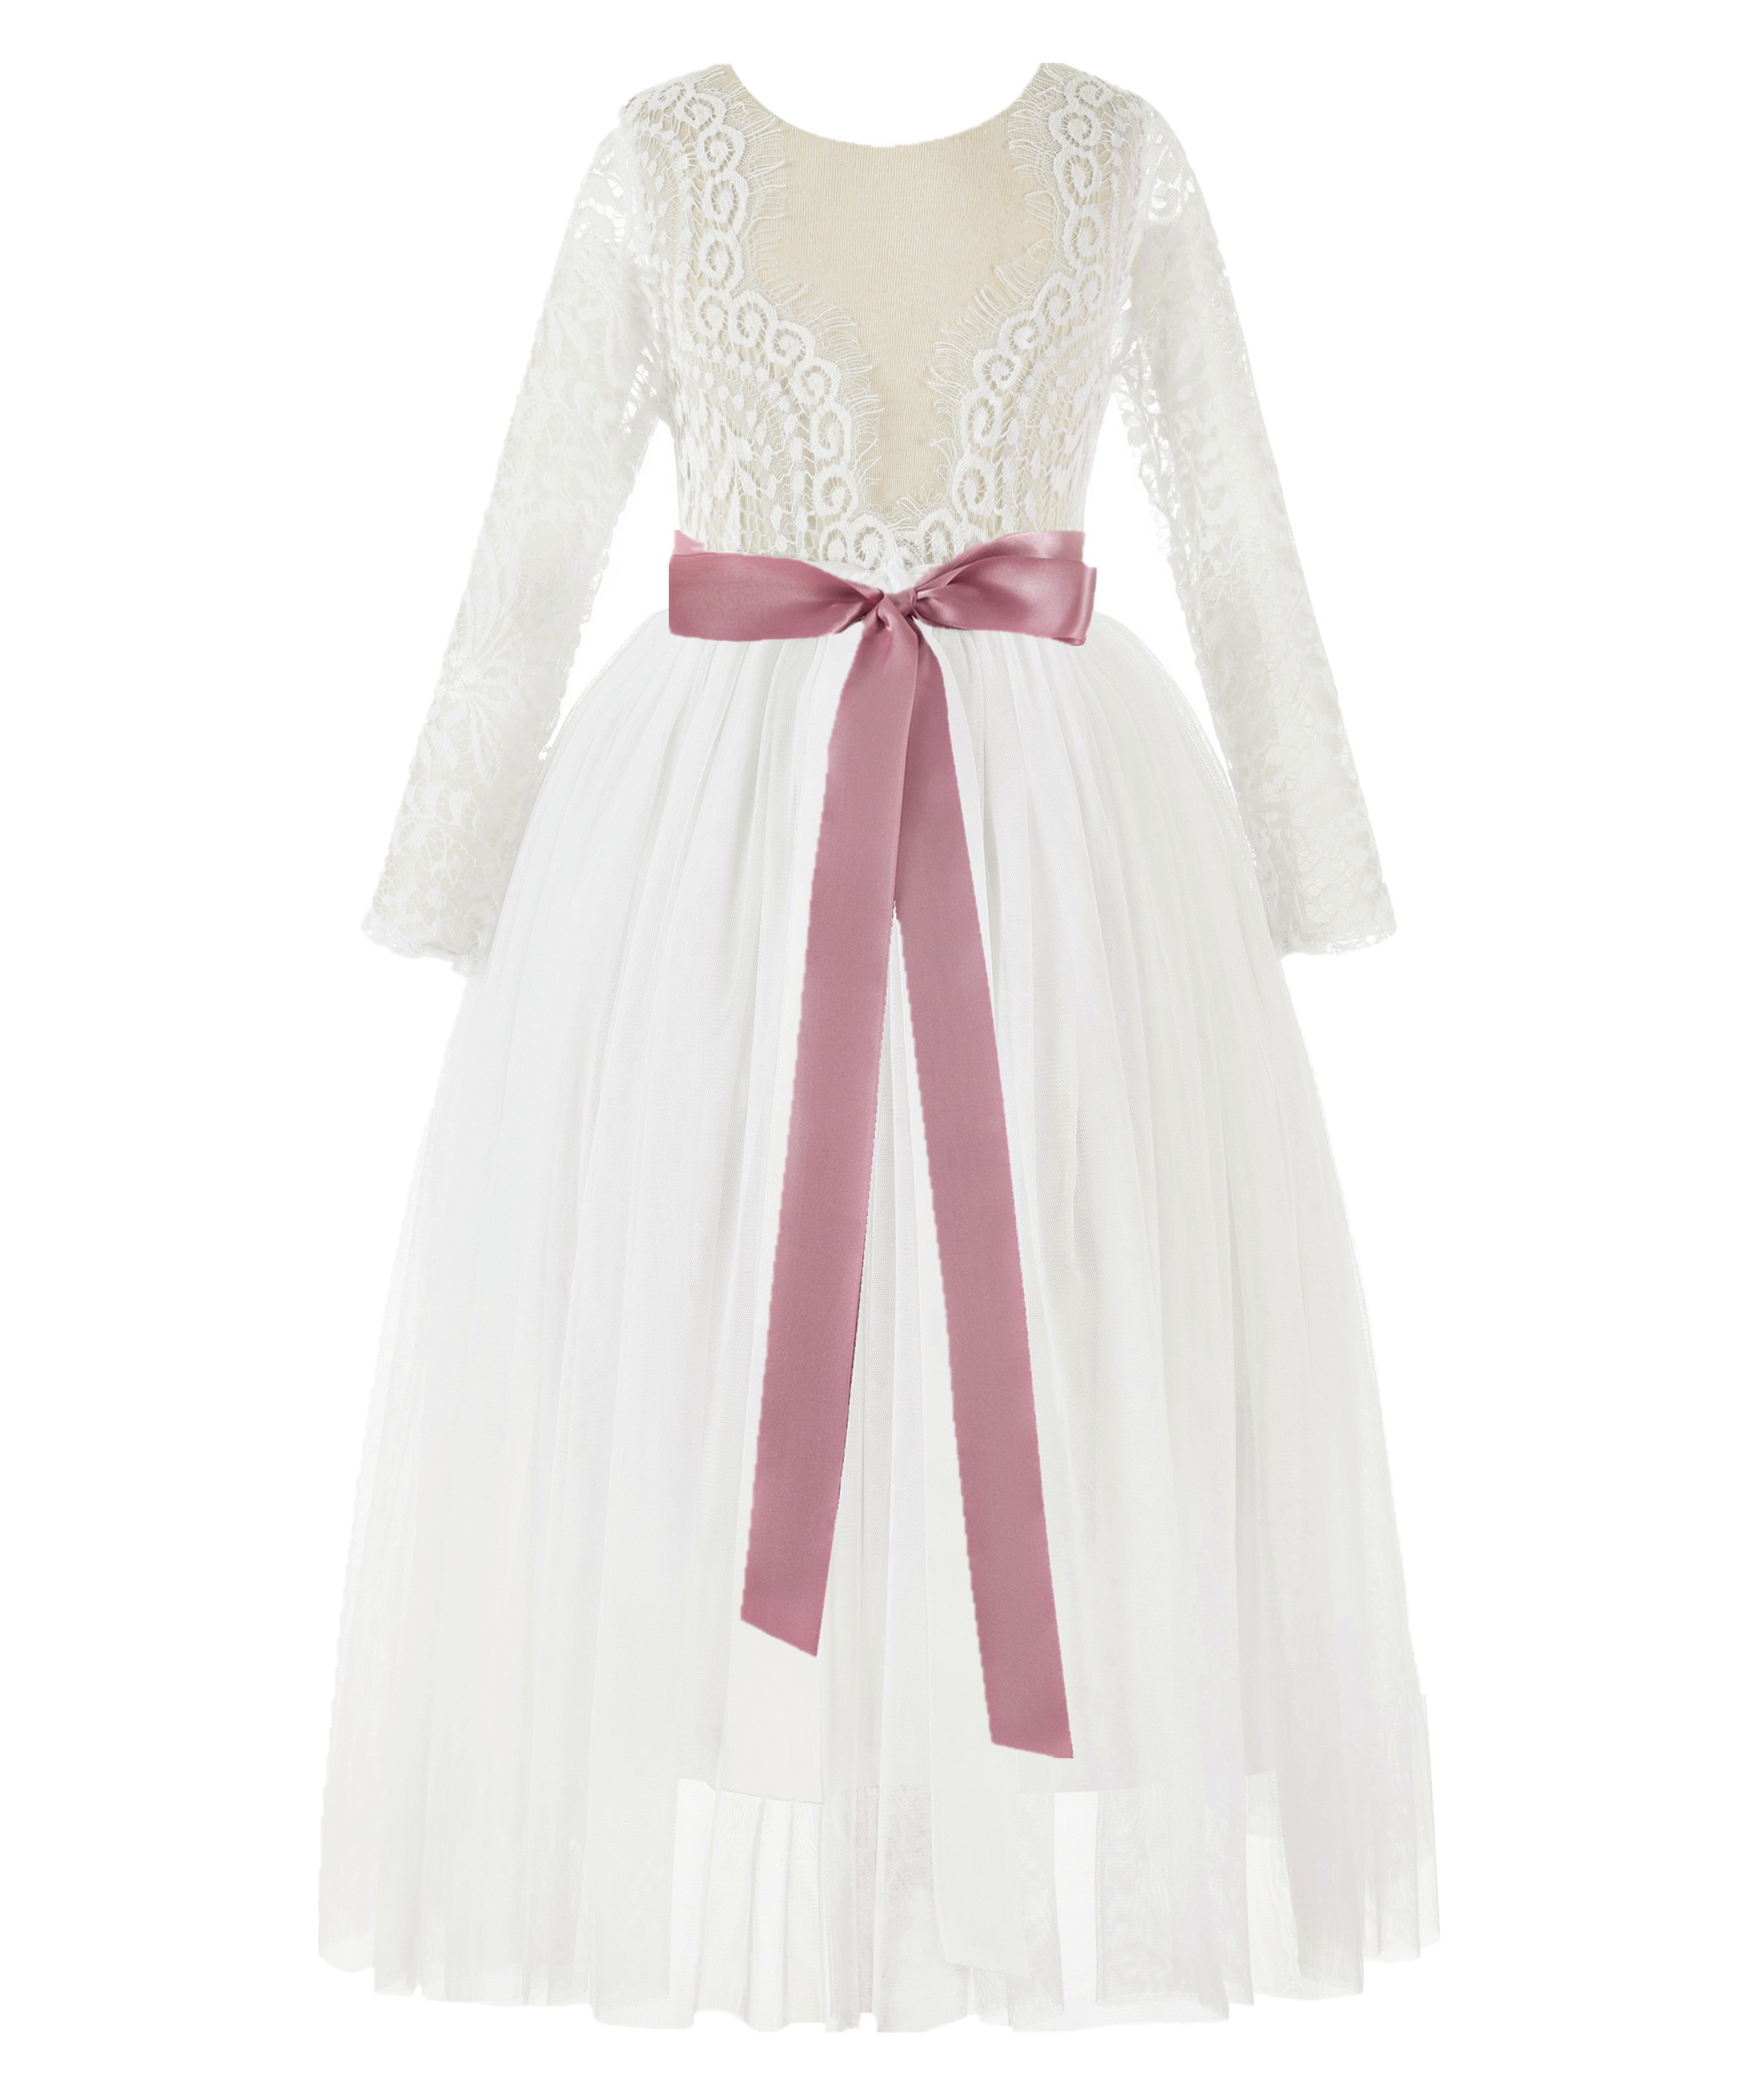 Ivory / Mauve A-Line V-Back Lace Flower Girl Dress with Sleeves 290R